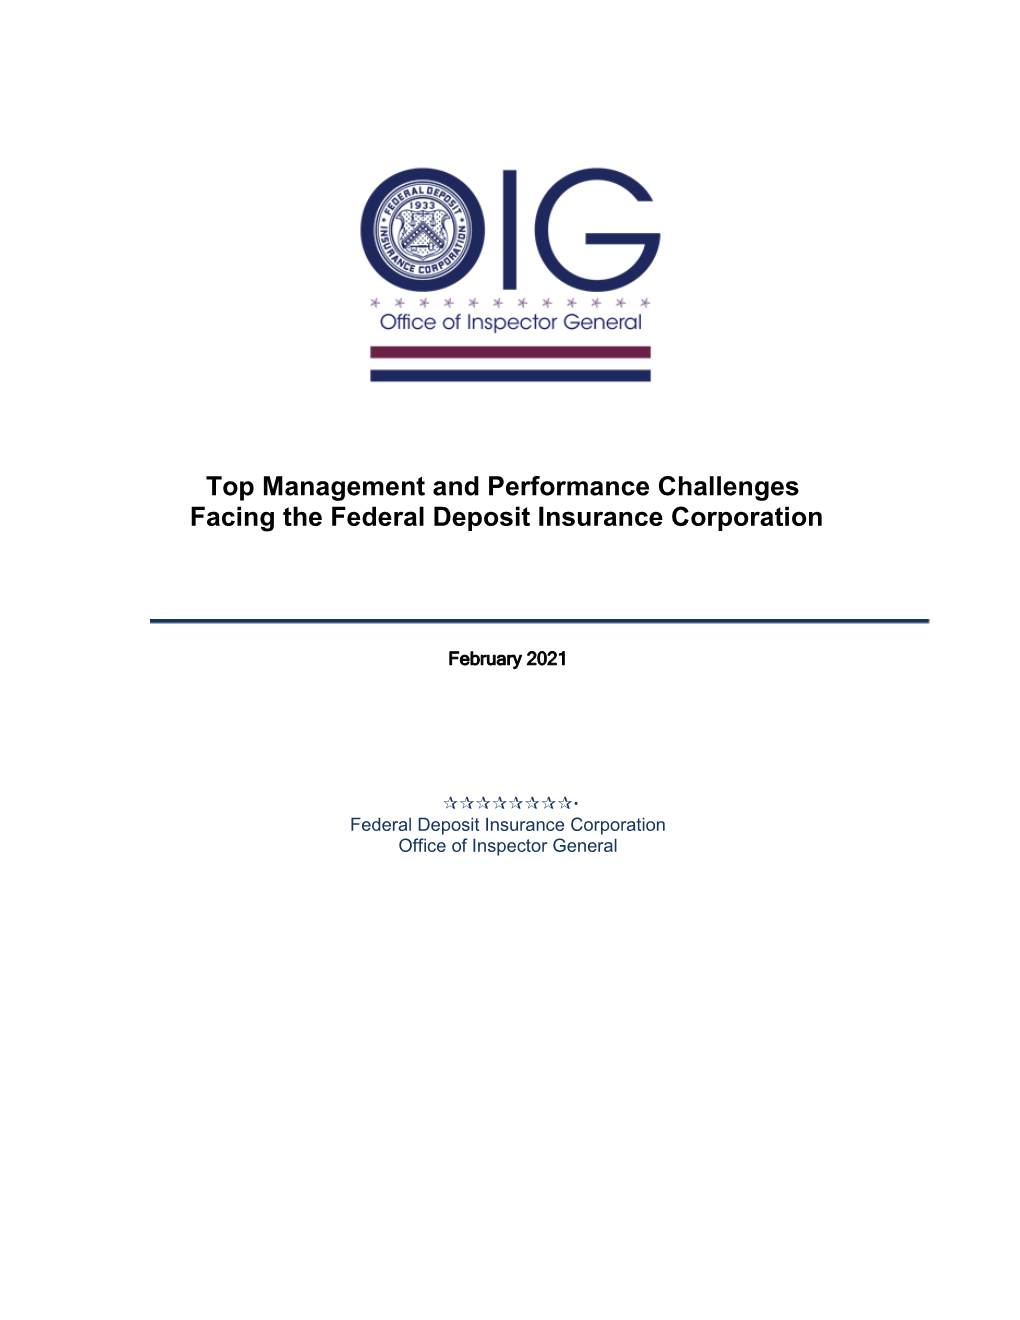 2020 Top Management and Performance Challenges Facing